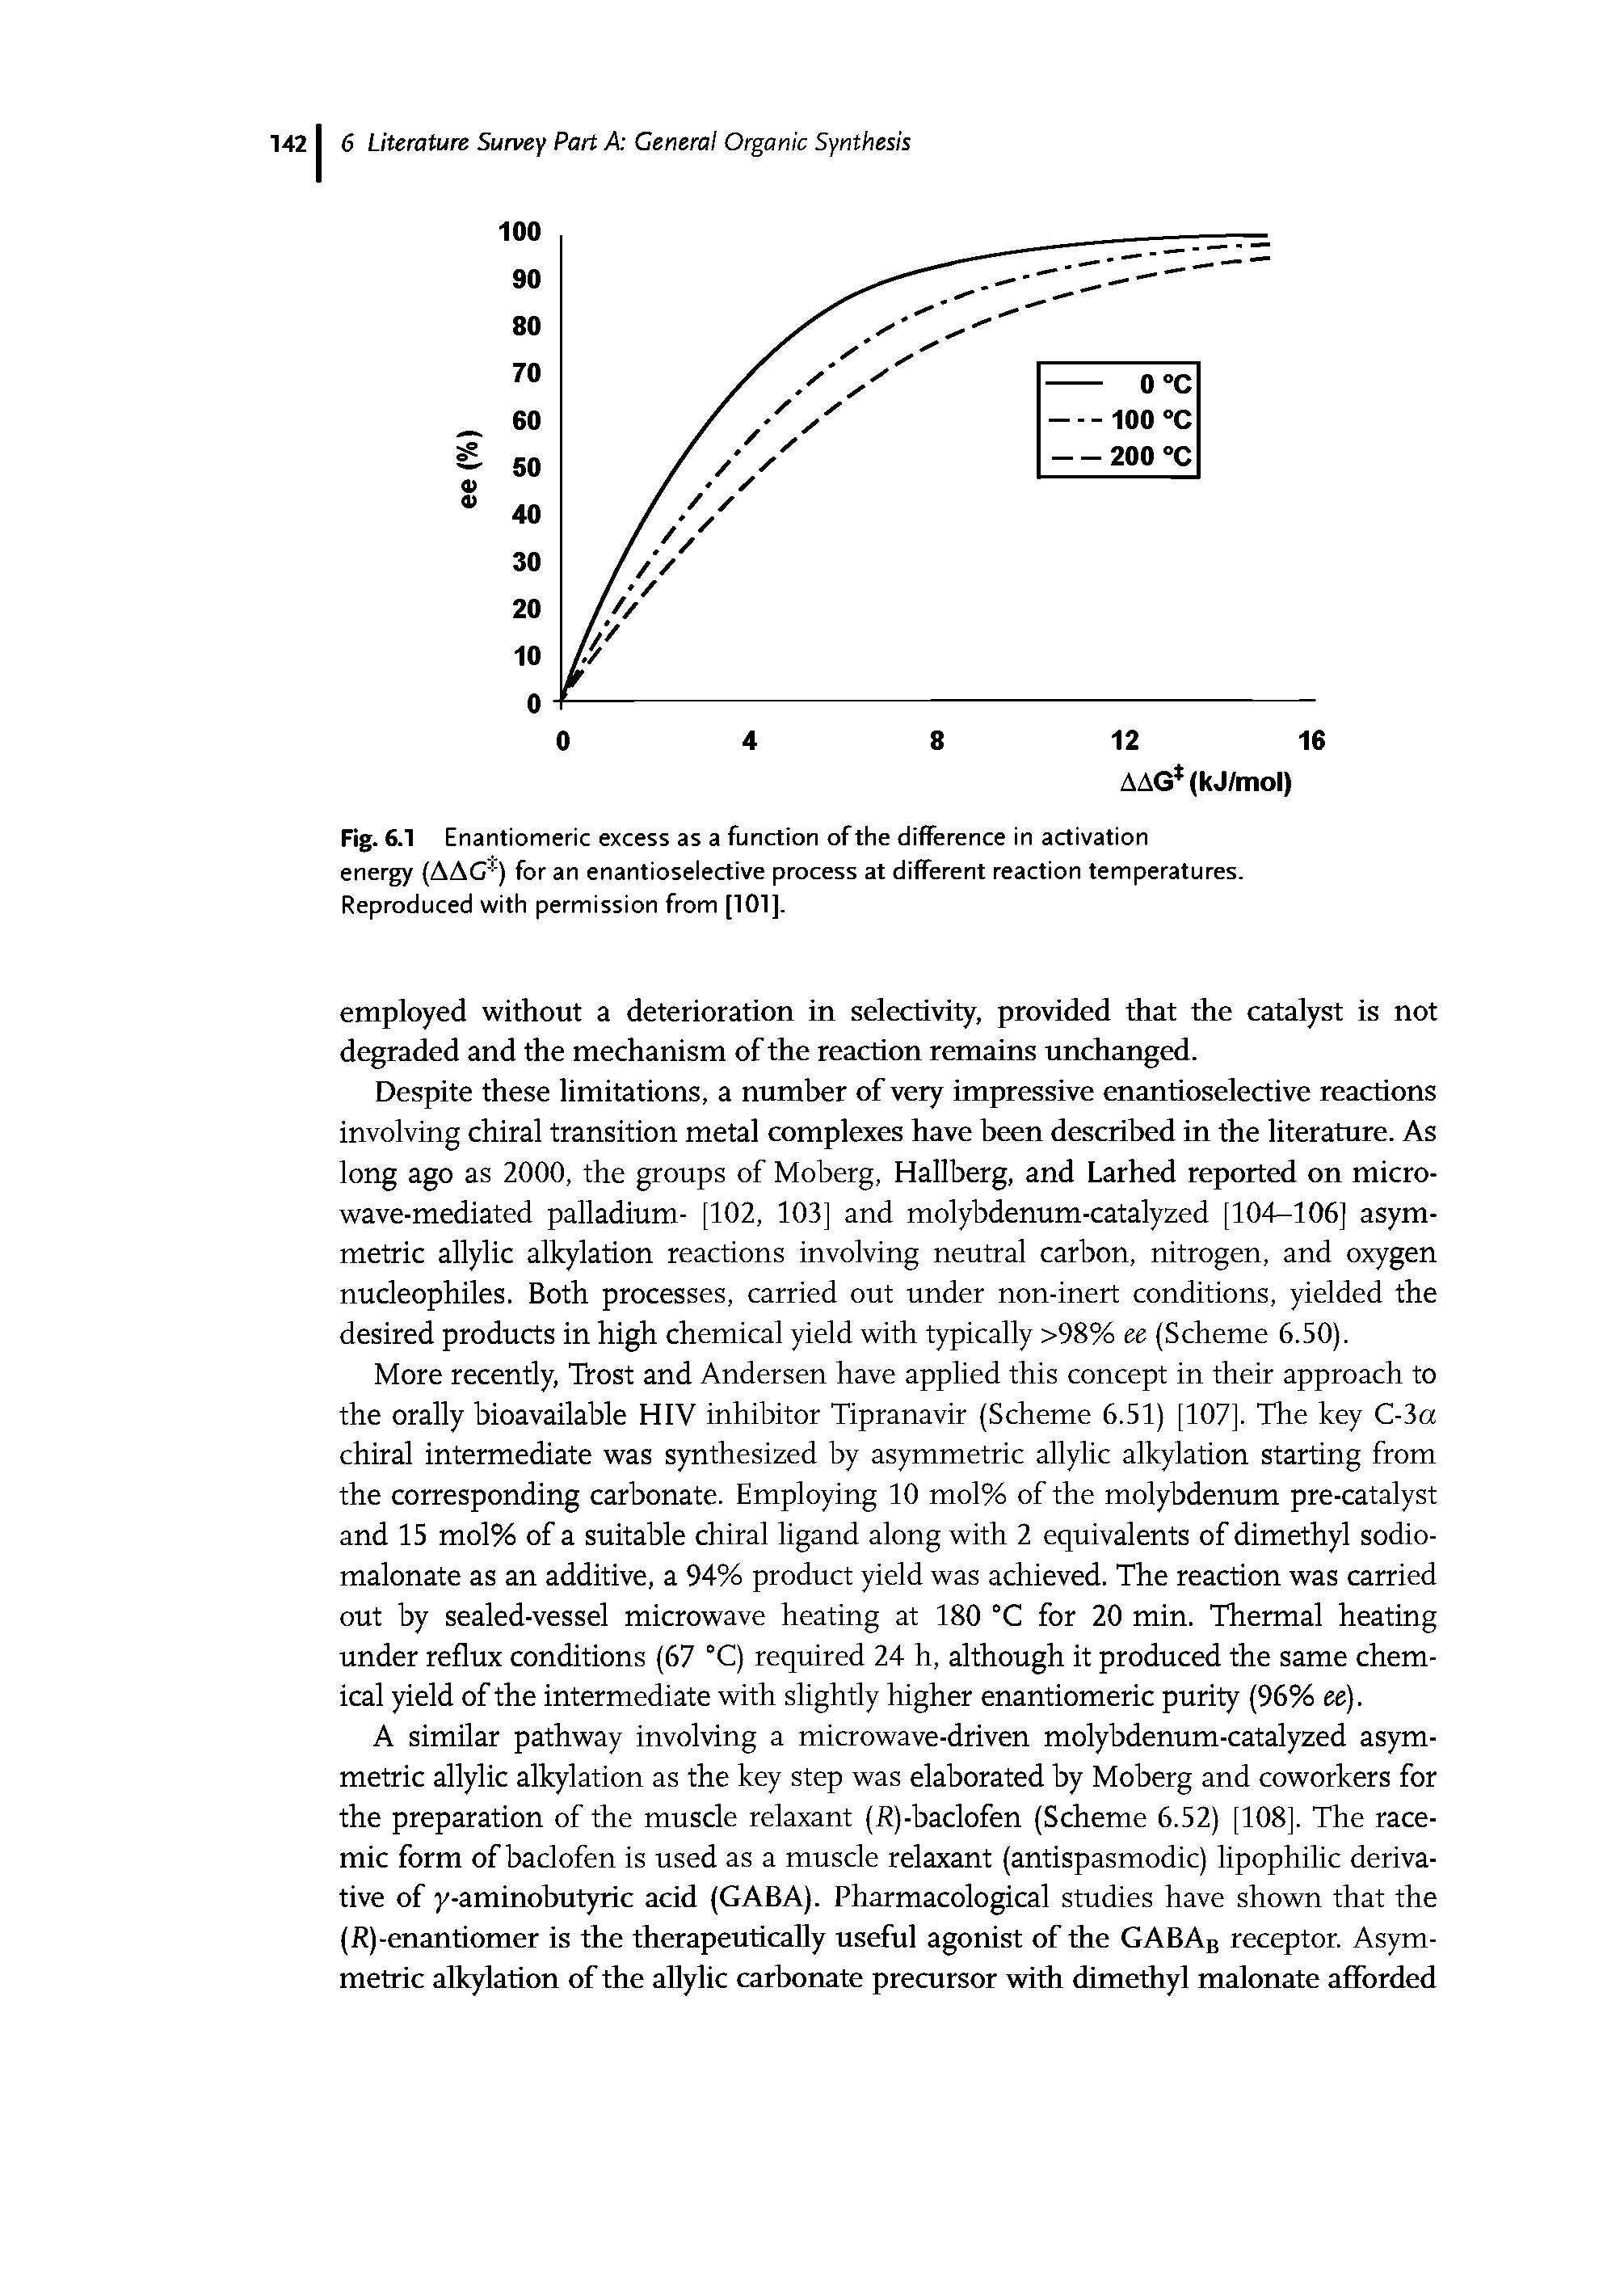 Fig. 6.1 Enantiomeric excess as a function of the difference in activation energy (AAG ) for an enantioselective process at different reaction temperatures. Reproduced with permission from [101].